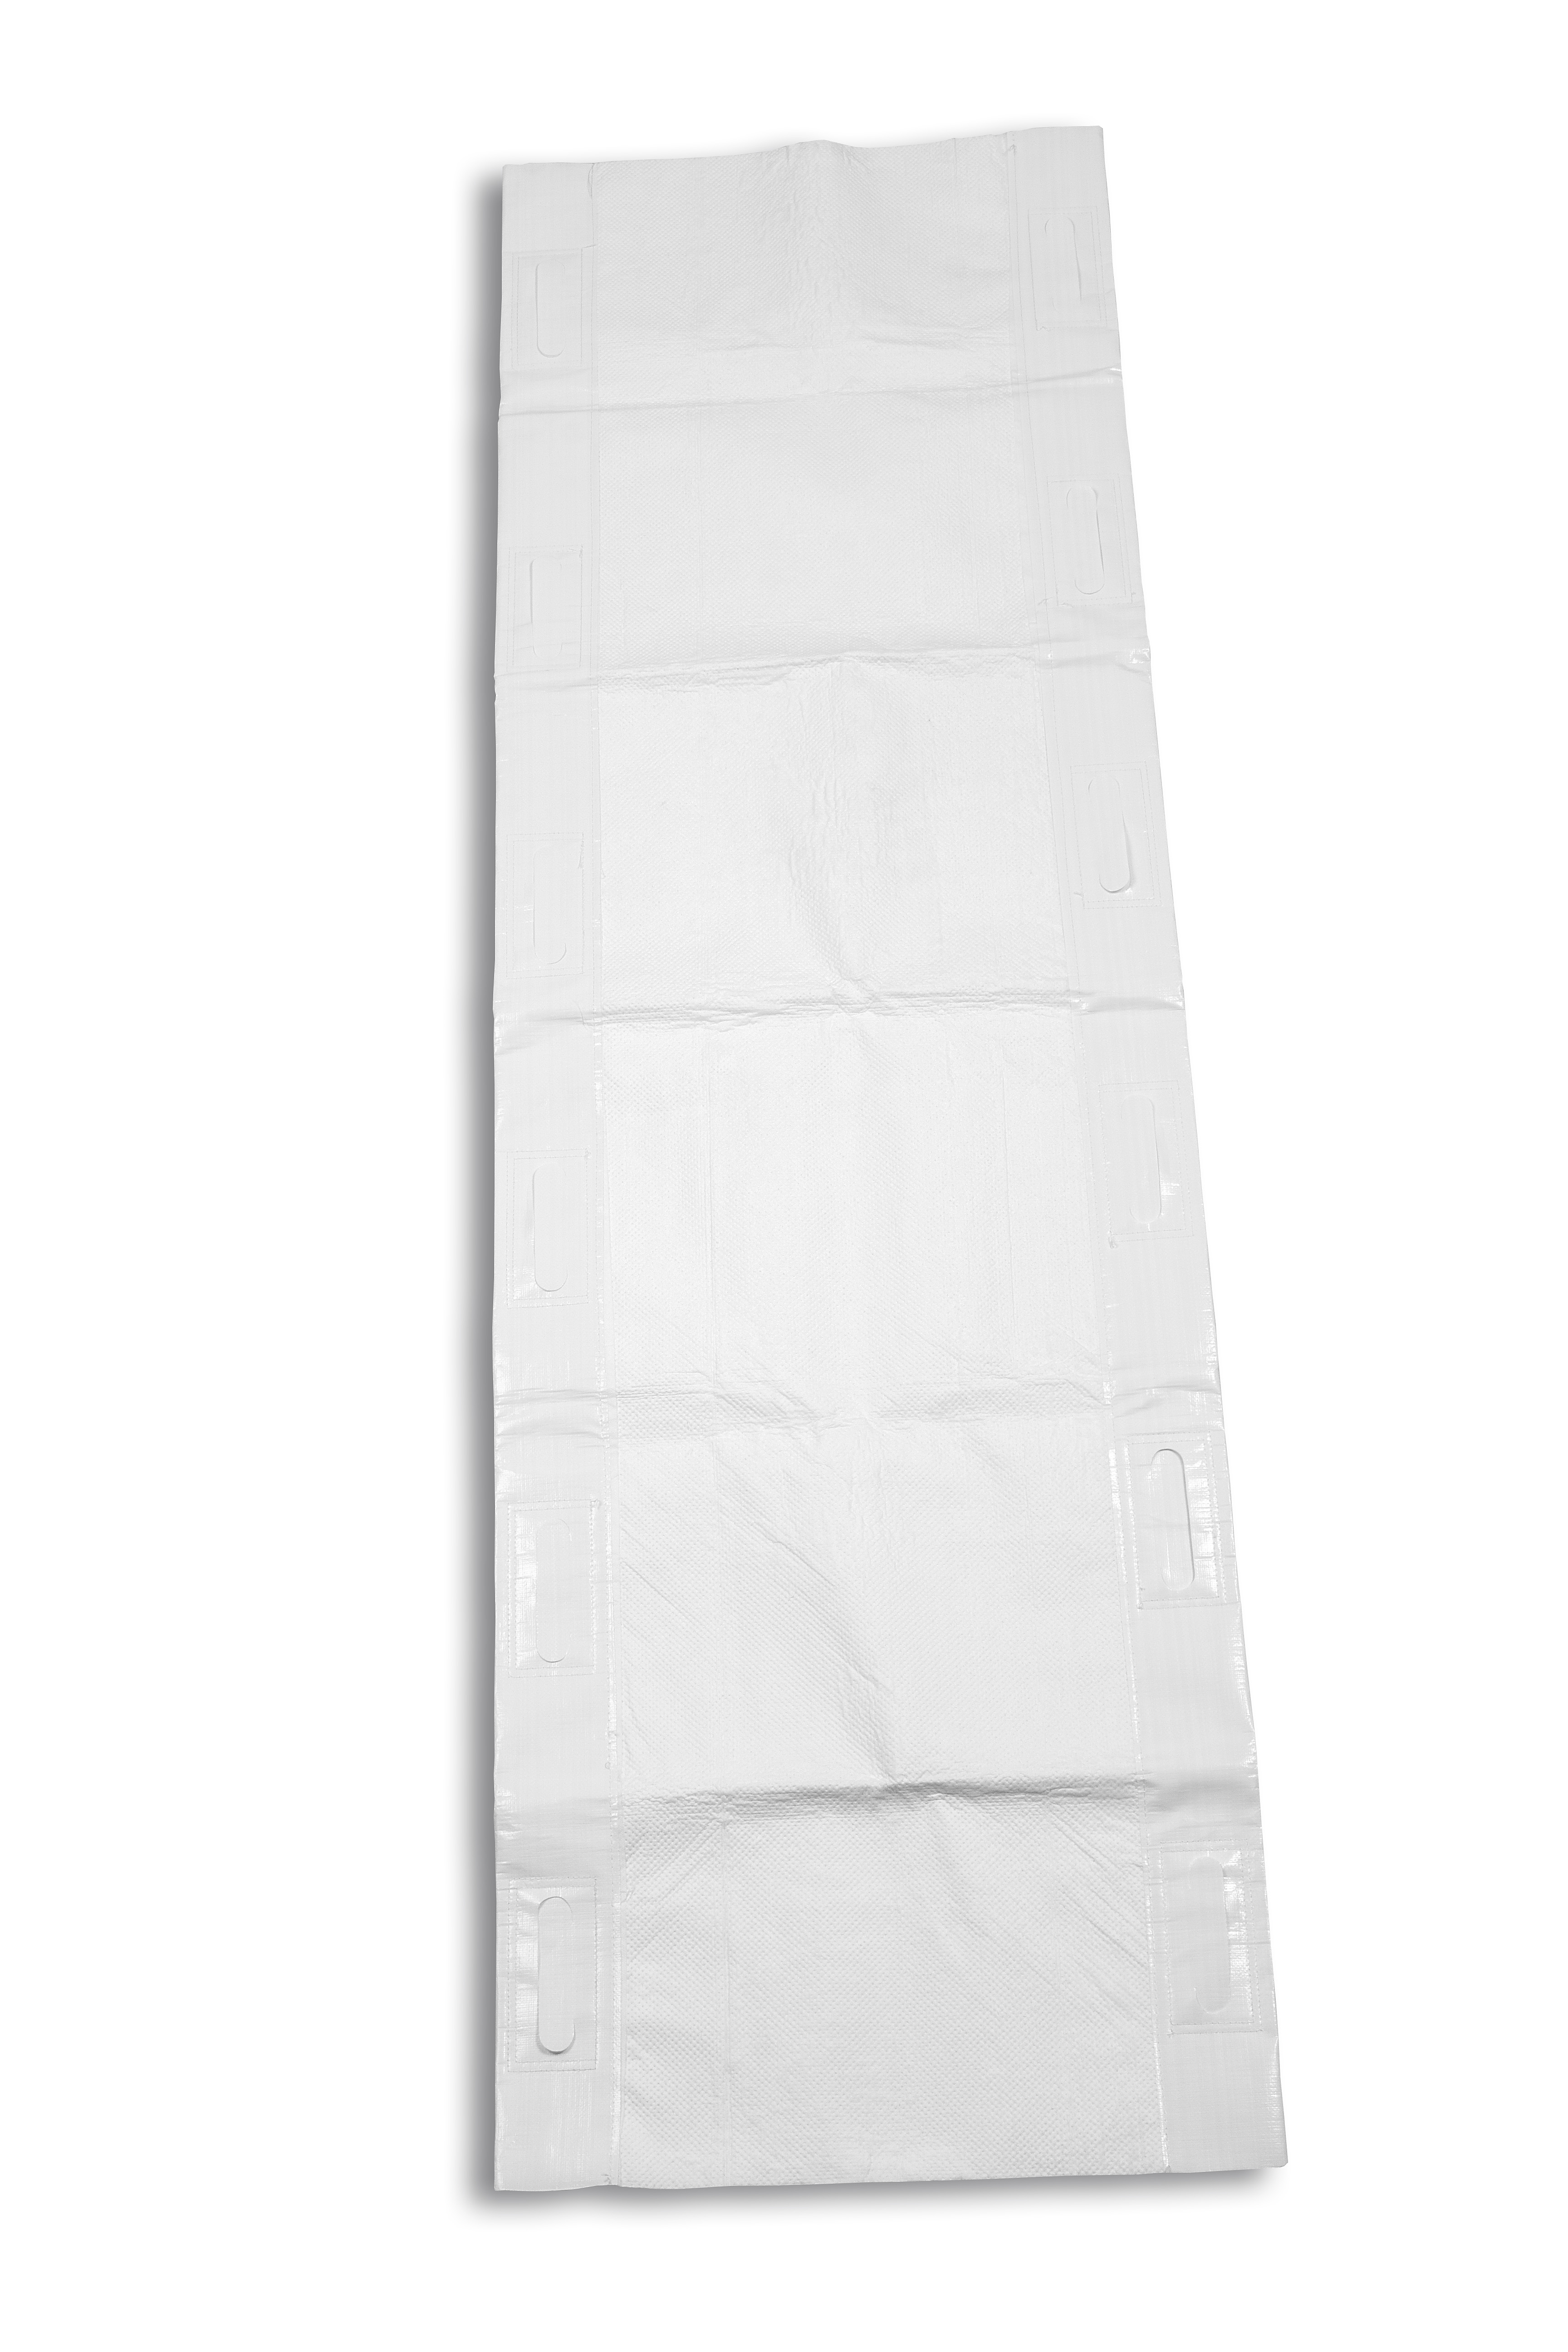 Disposable Carry Sheet, white, with an absorbent core, tested based on the standard DIN EN 1865, with 12 Handels, extra strong laminated, tearproof, water resistant, individually packed, only for single use

Material:
Polyester, Nylon Size: 200 x 70 cm
Unit: 24 pcs./ctn – 20 VE/Pallet
Cartonsize: 60x40x40 cm
Net weight: 17,30 kg Gross weight: 18,30 kg